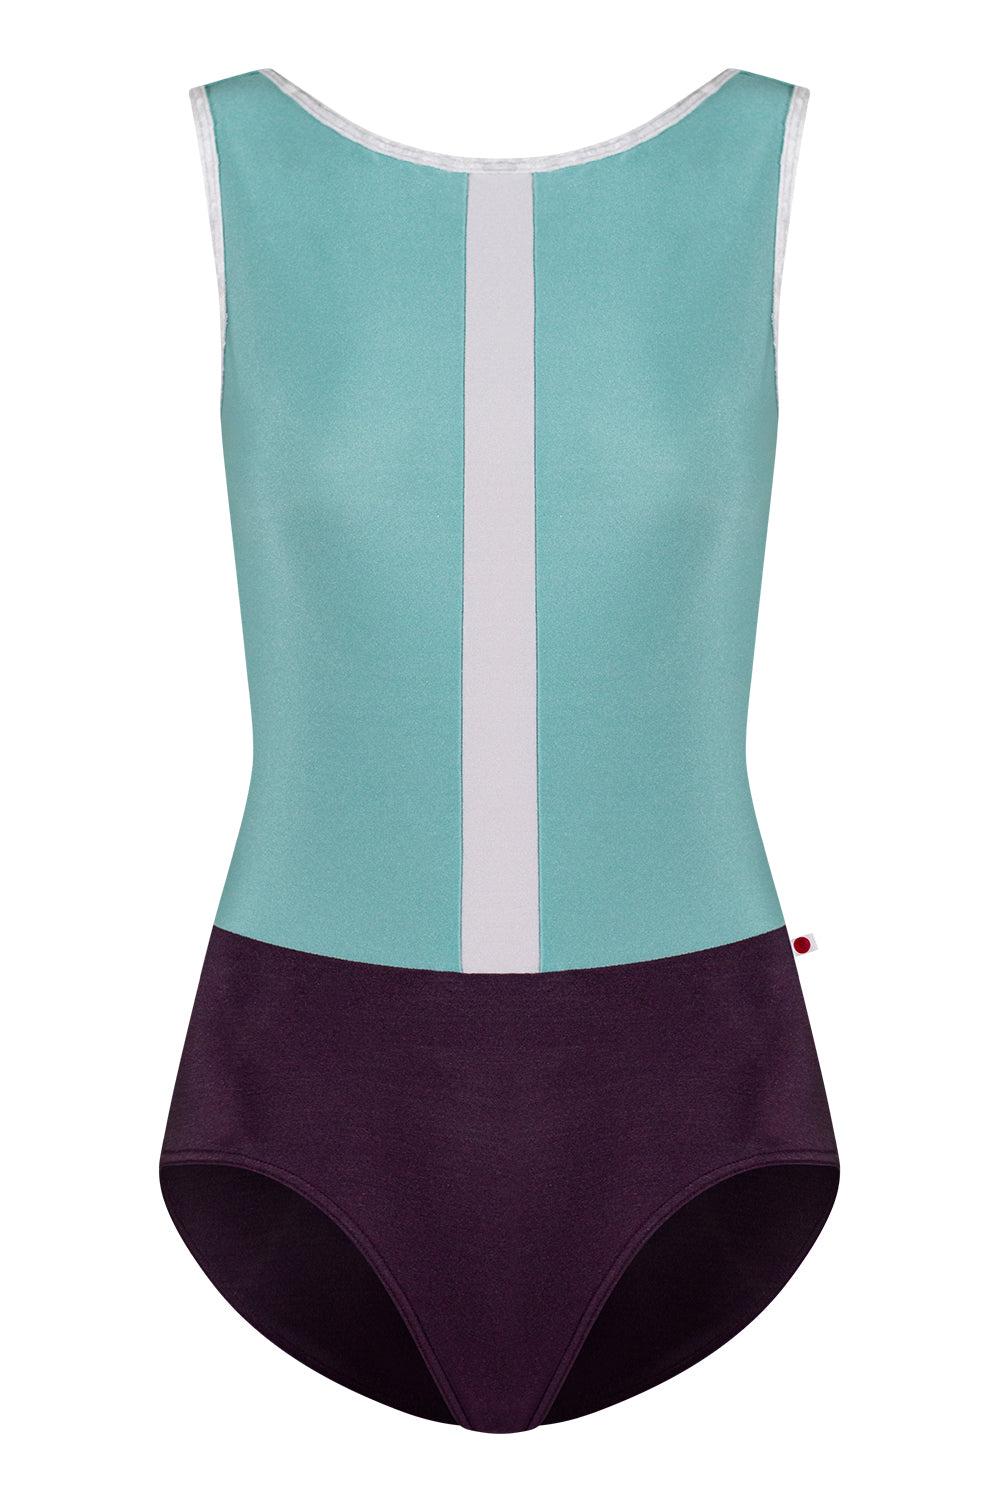 Didi leotard in N-Eggplant body color with N-Cactus top color, N-Silver stripe and CV-Silver trim color